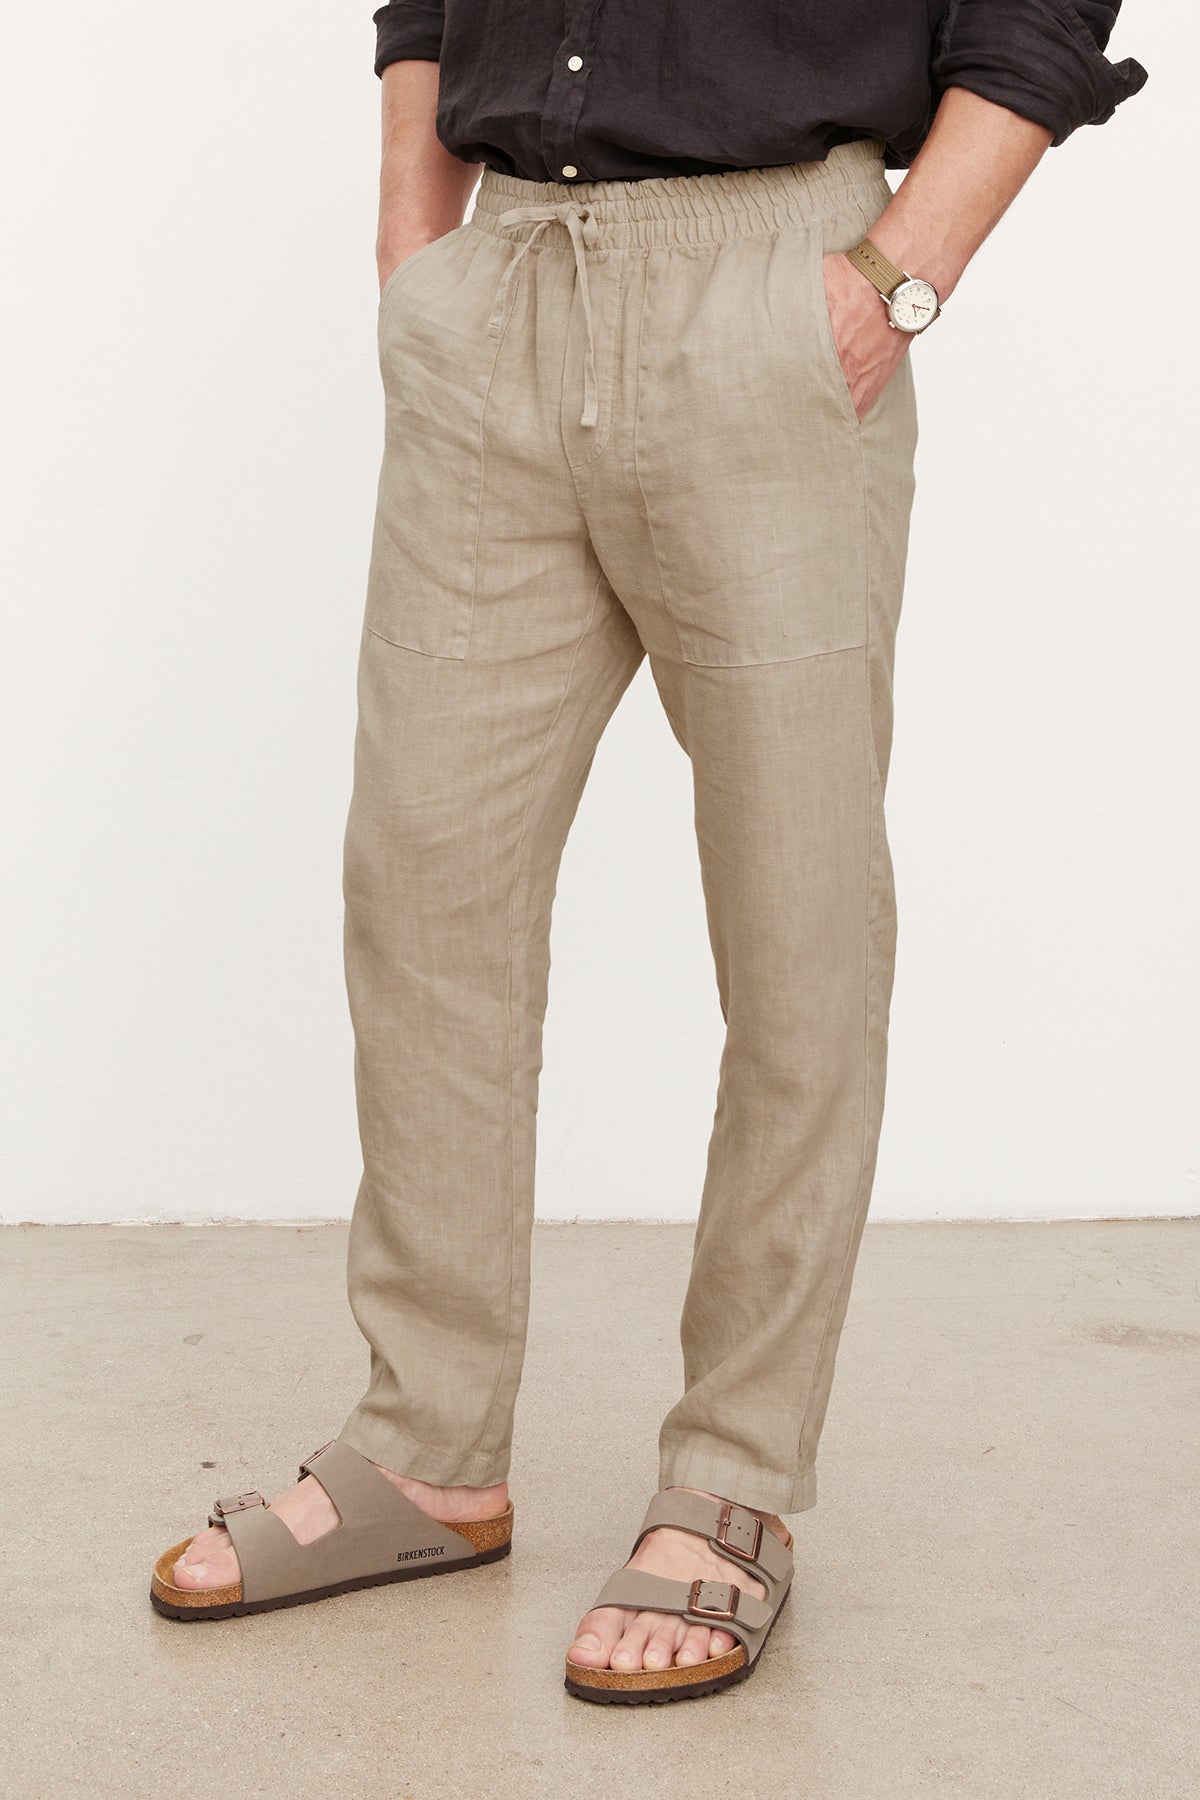 Man standing in a casual pose wearing Velvet by Graham & Spencer's Phelan Linen Pants, a black shirt, a watch, and beige sandals. Only the lower half of his body is visible.-36532720206017